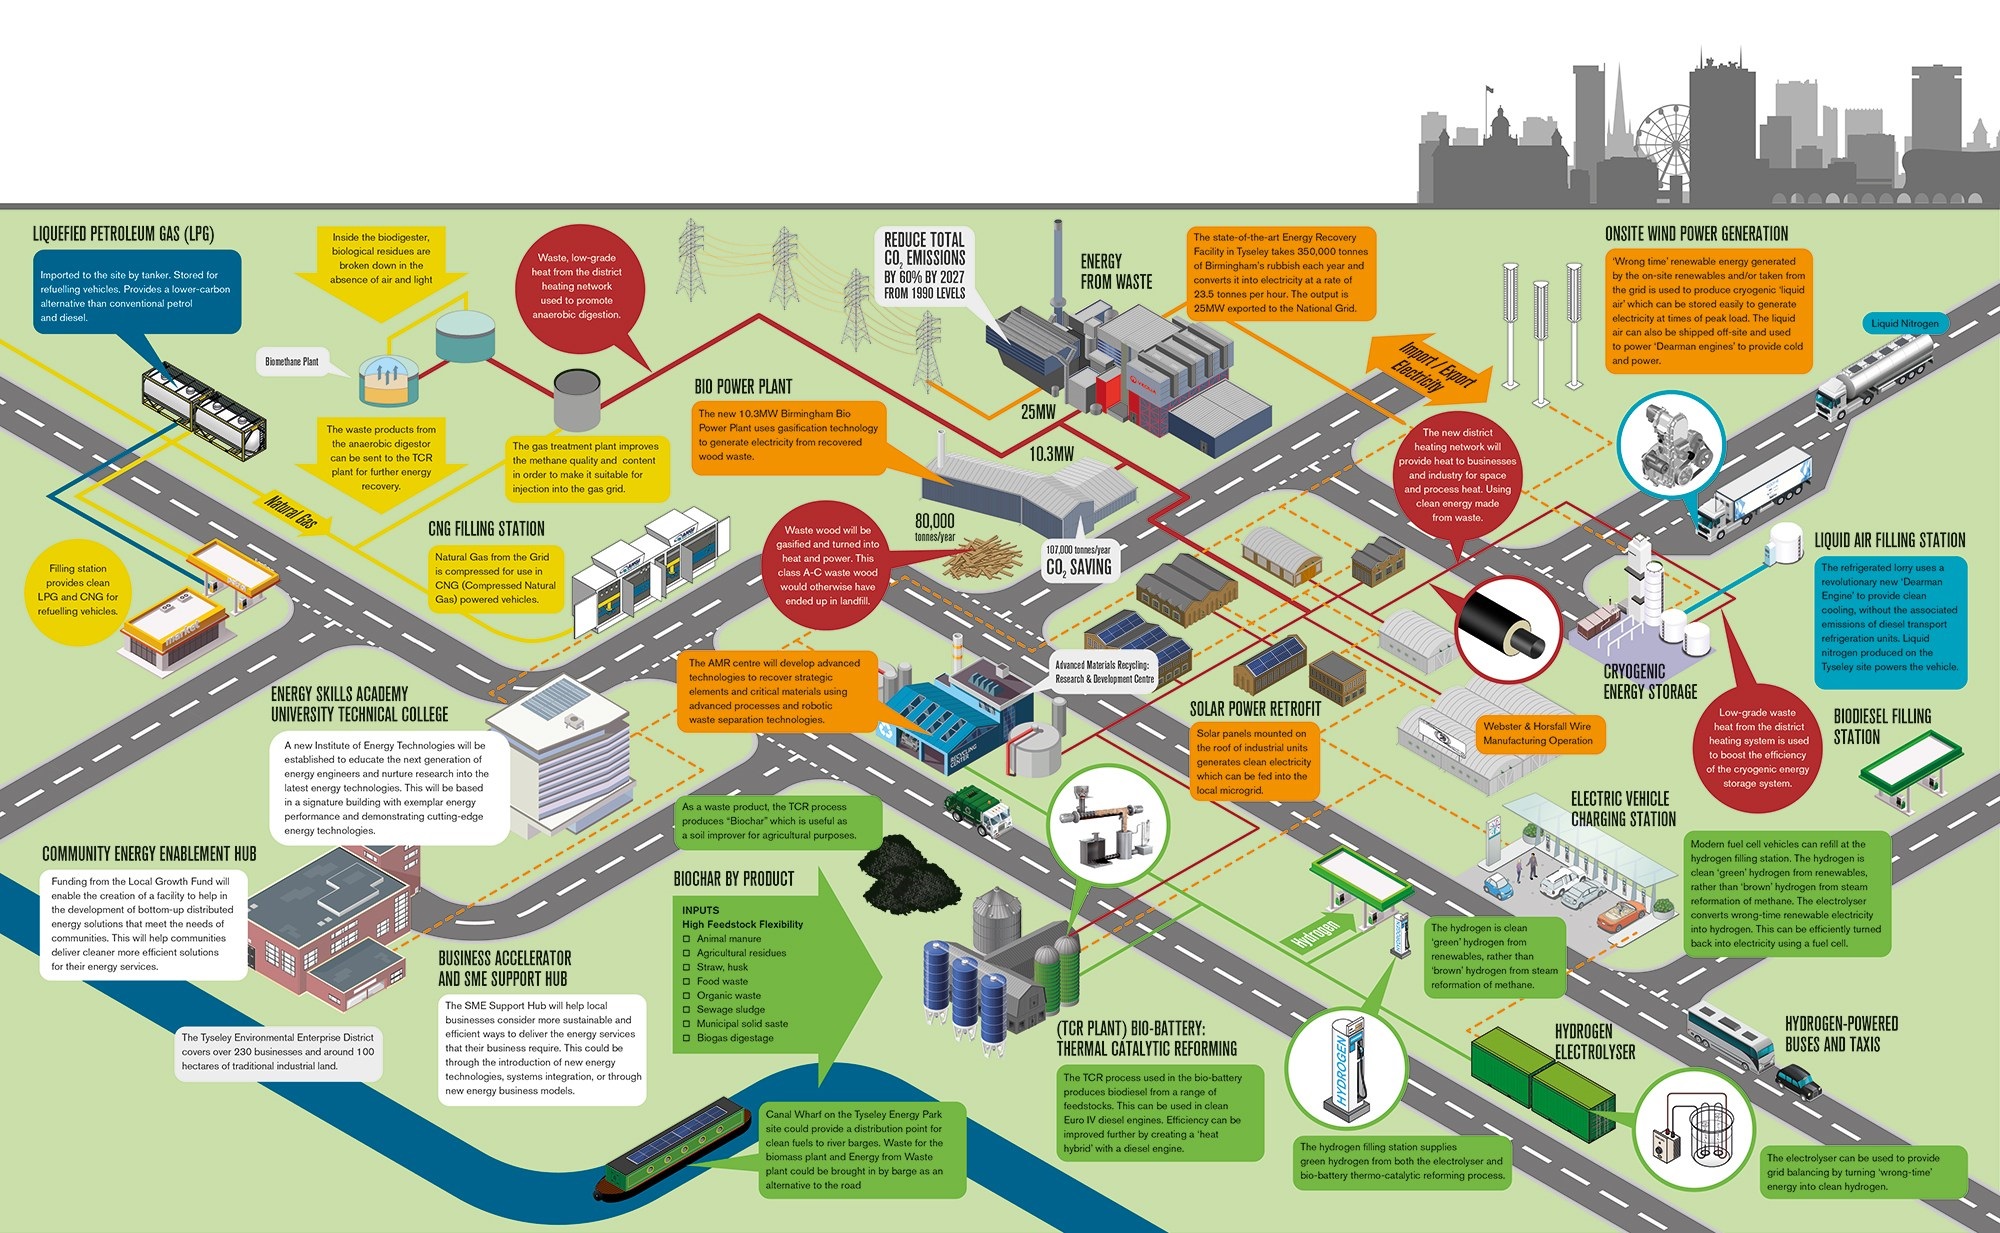 An image showing how different elements of the Tyseley Energy Innovation Zone could work